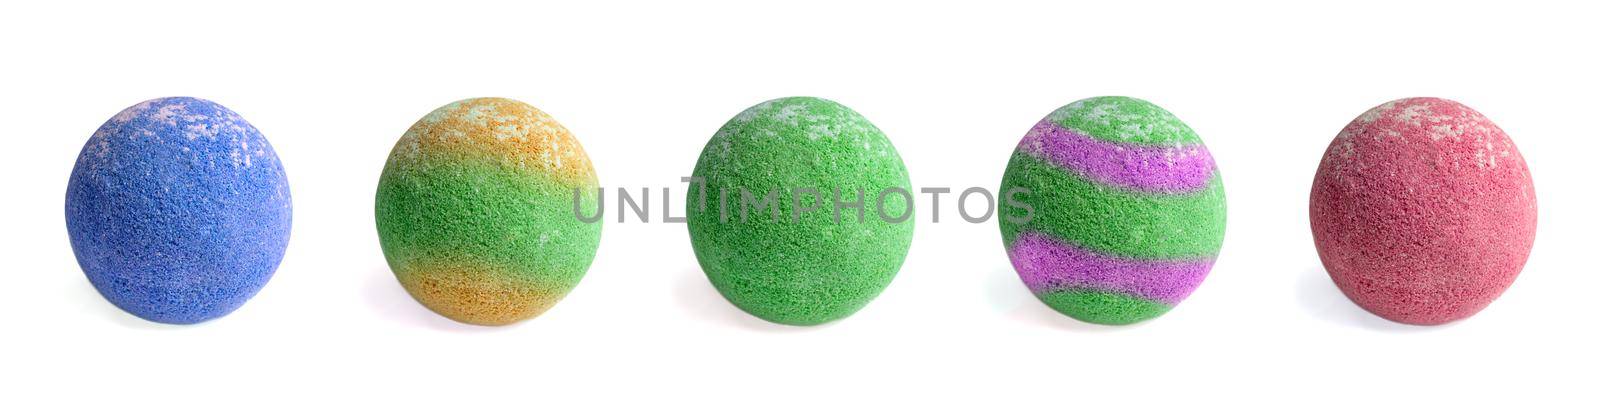 Set of aromatic bath bombs on a white background. aromatic bath balls of different colors. by SERSOL